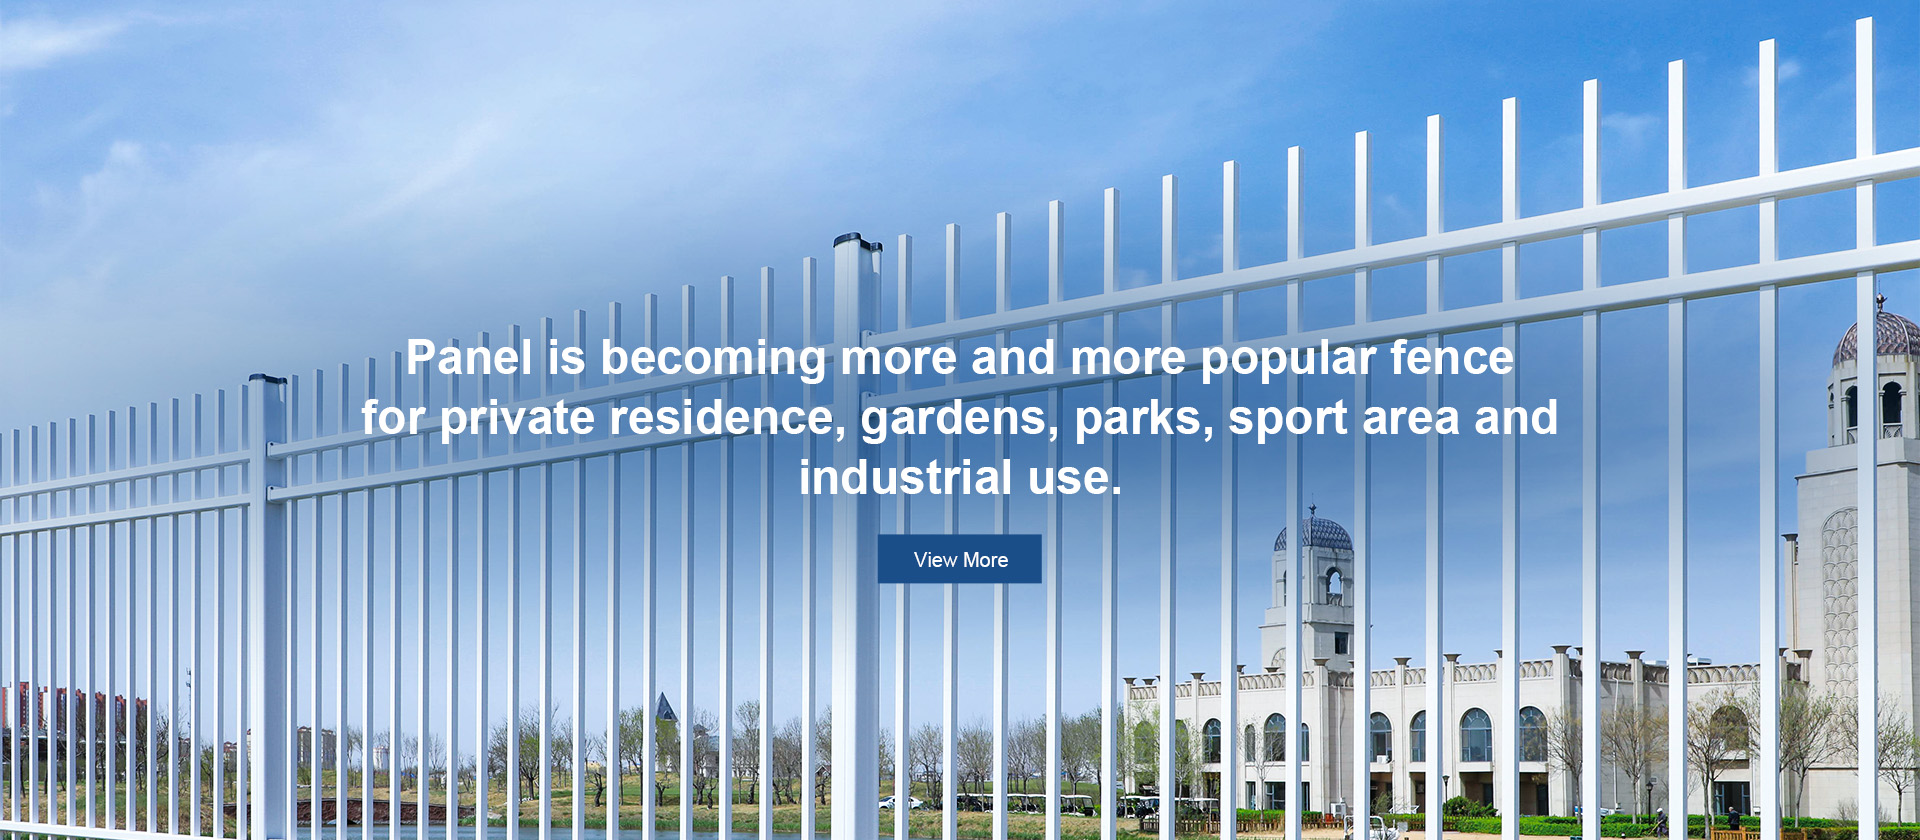 Panel is becoming more and more popular fence 
for private residence, gardens, parks, sport area and industrial use.